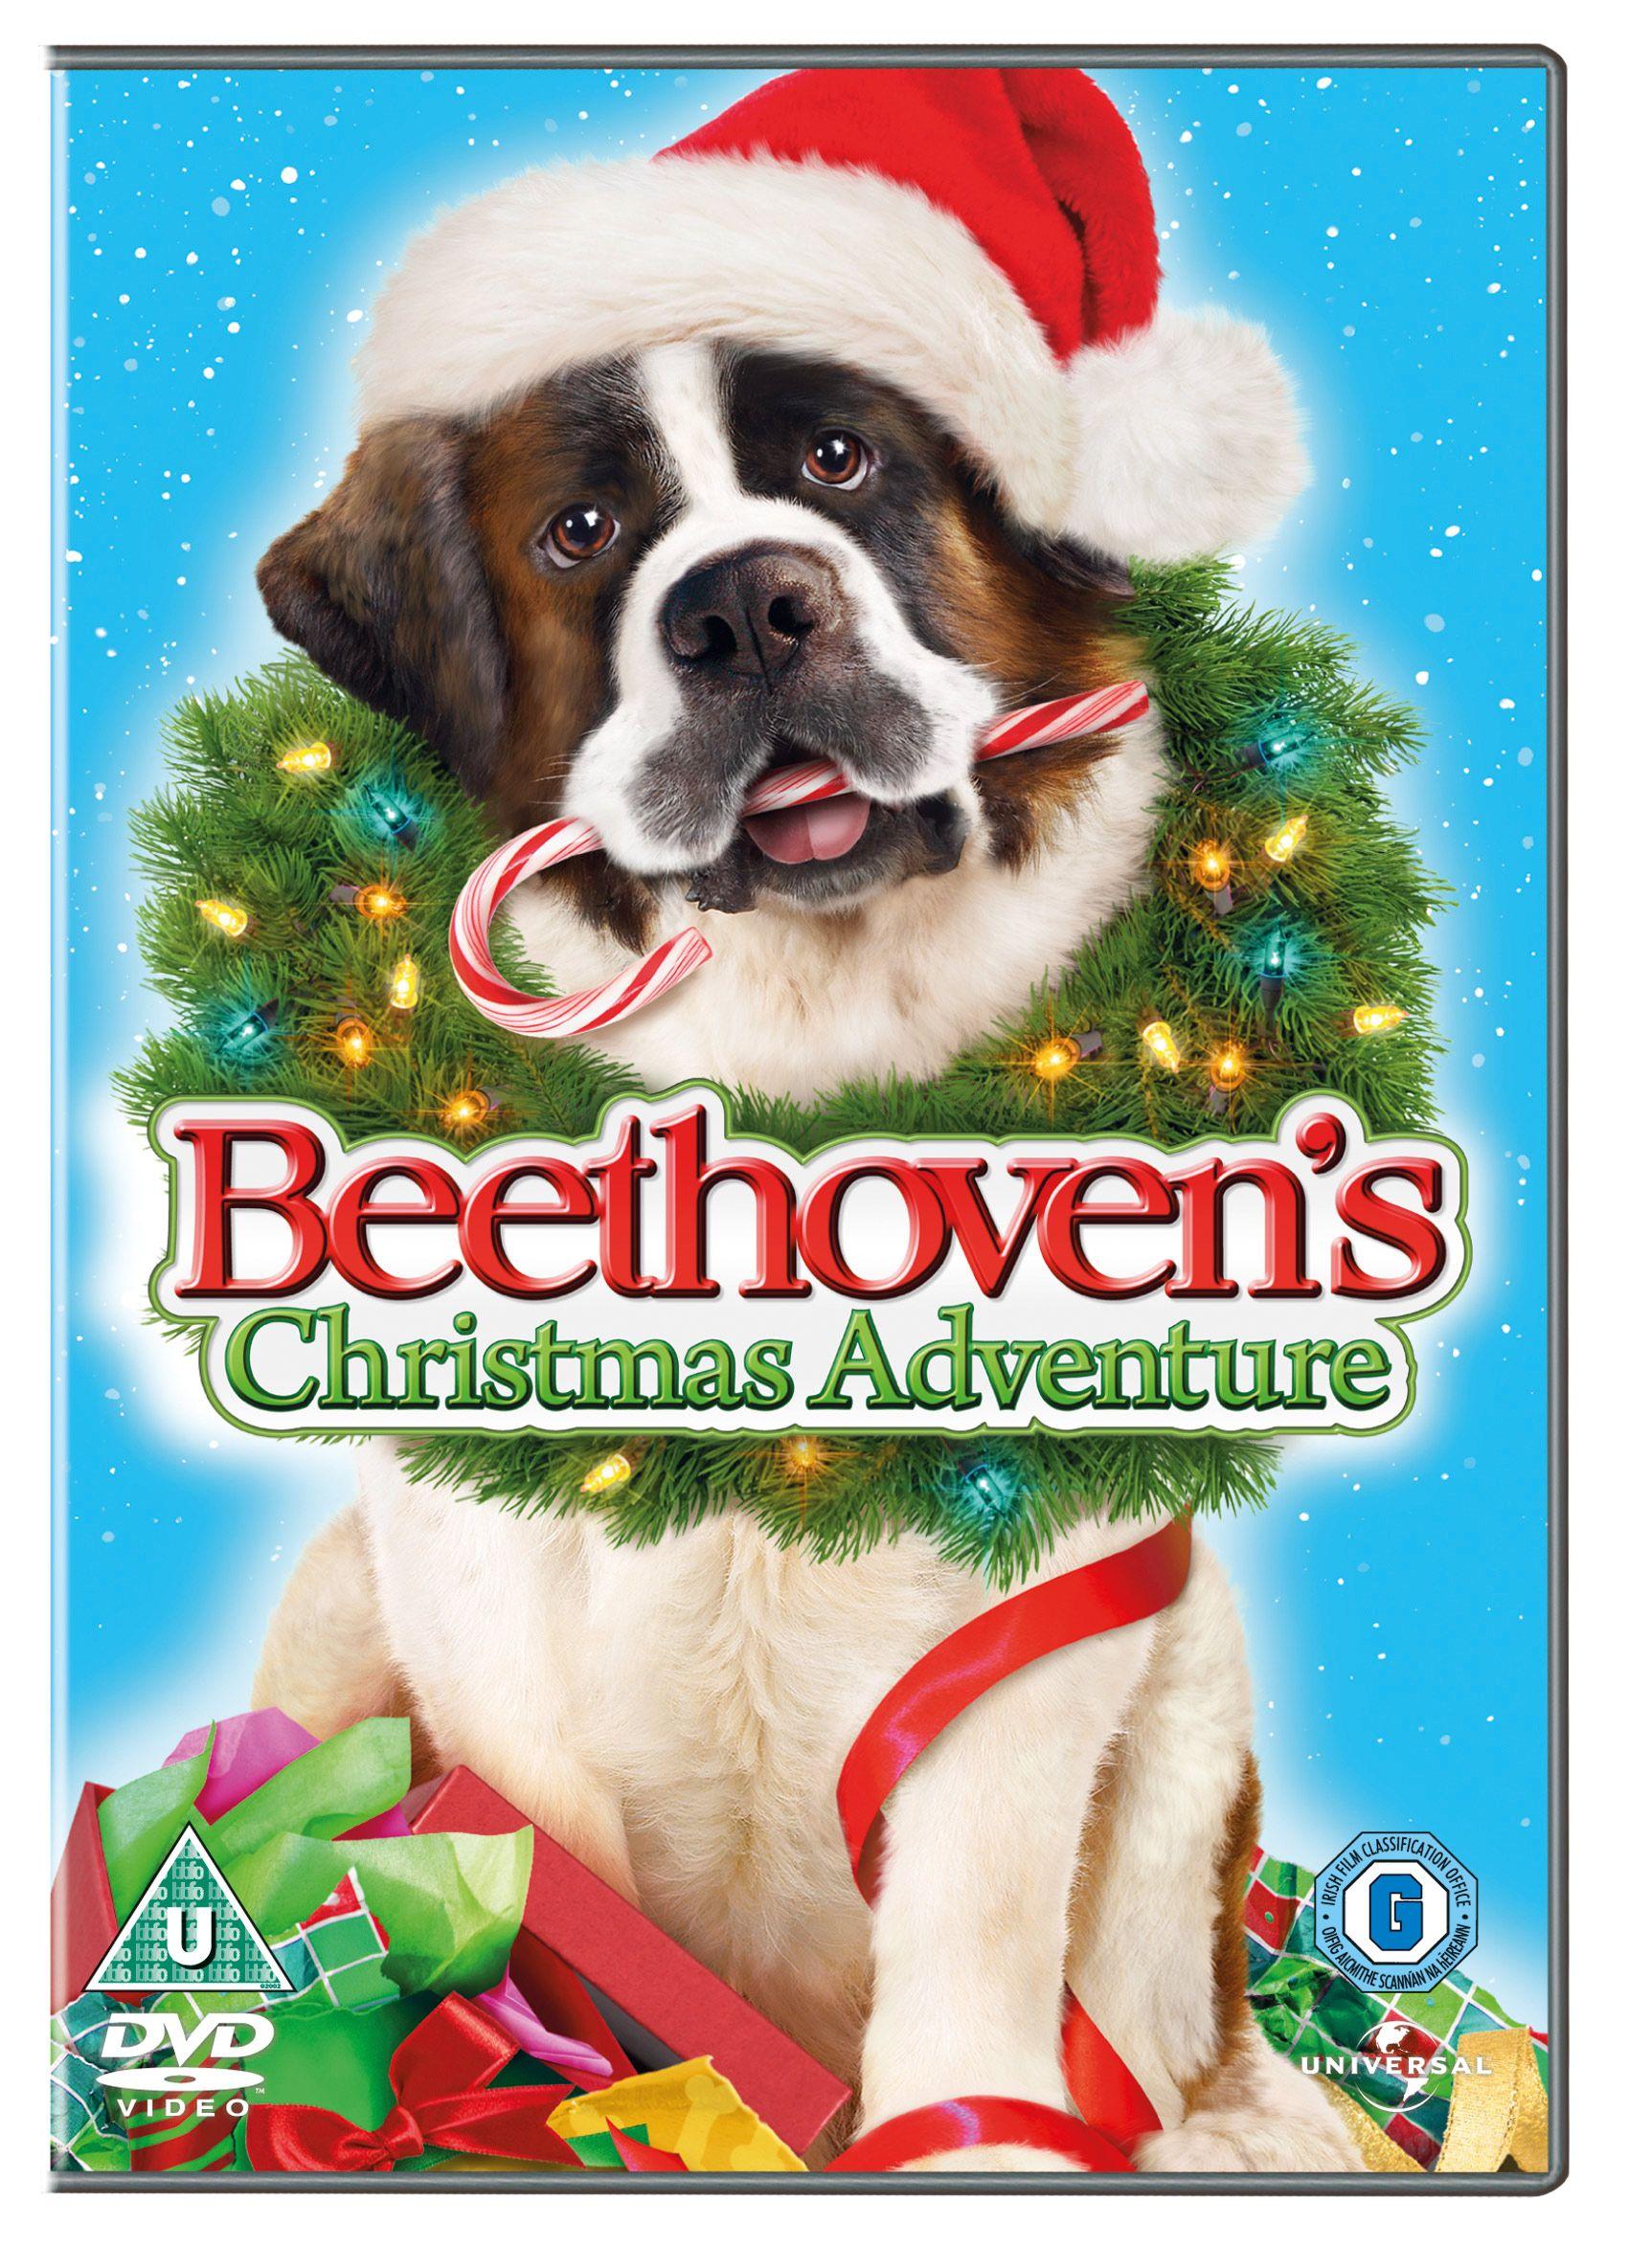 Christmas Special With Dogs You Need To Marathon ASAP